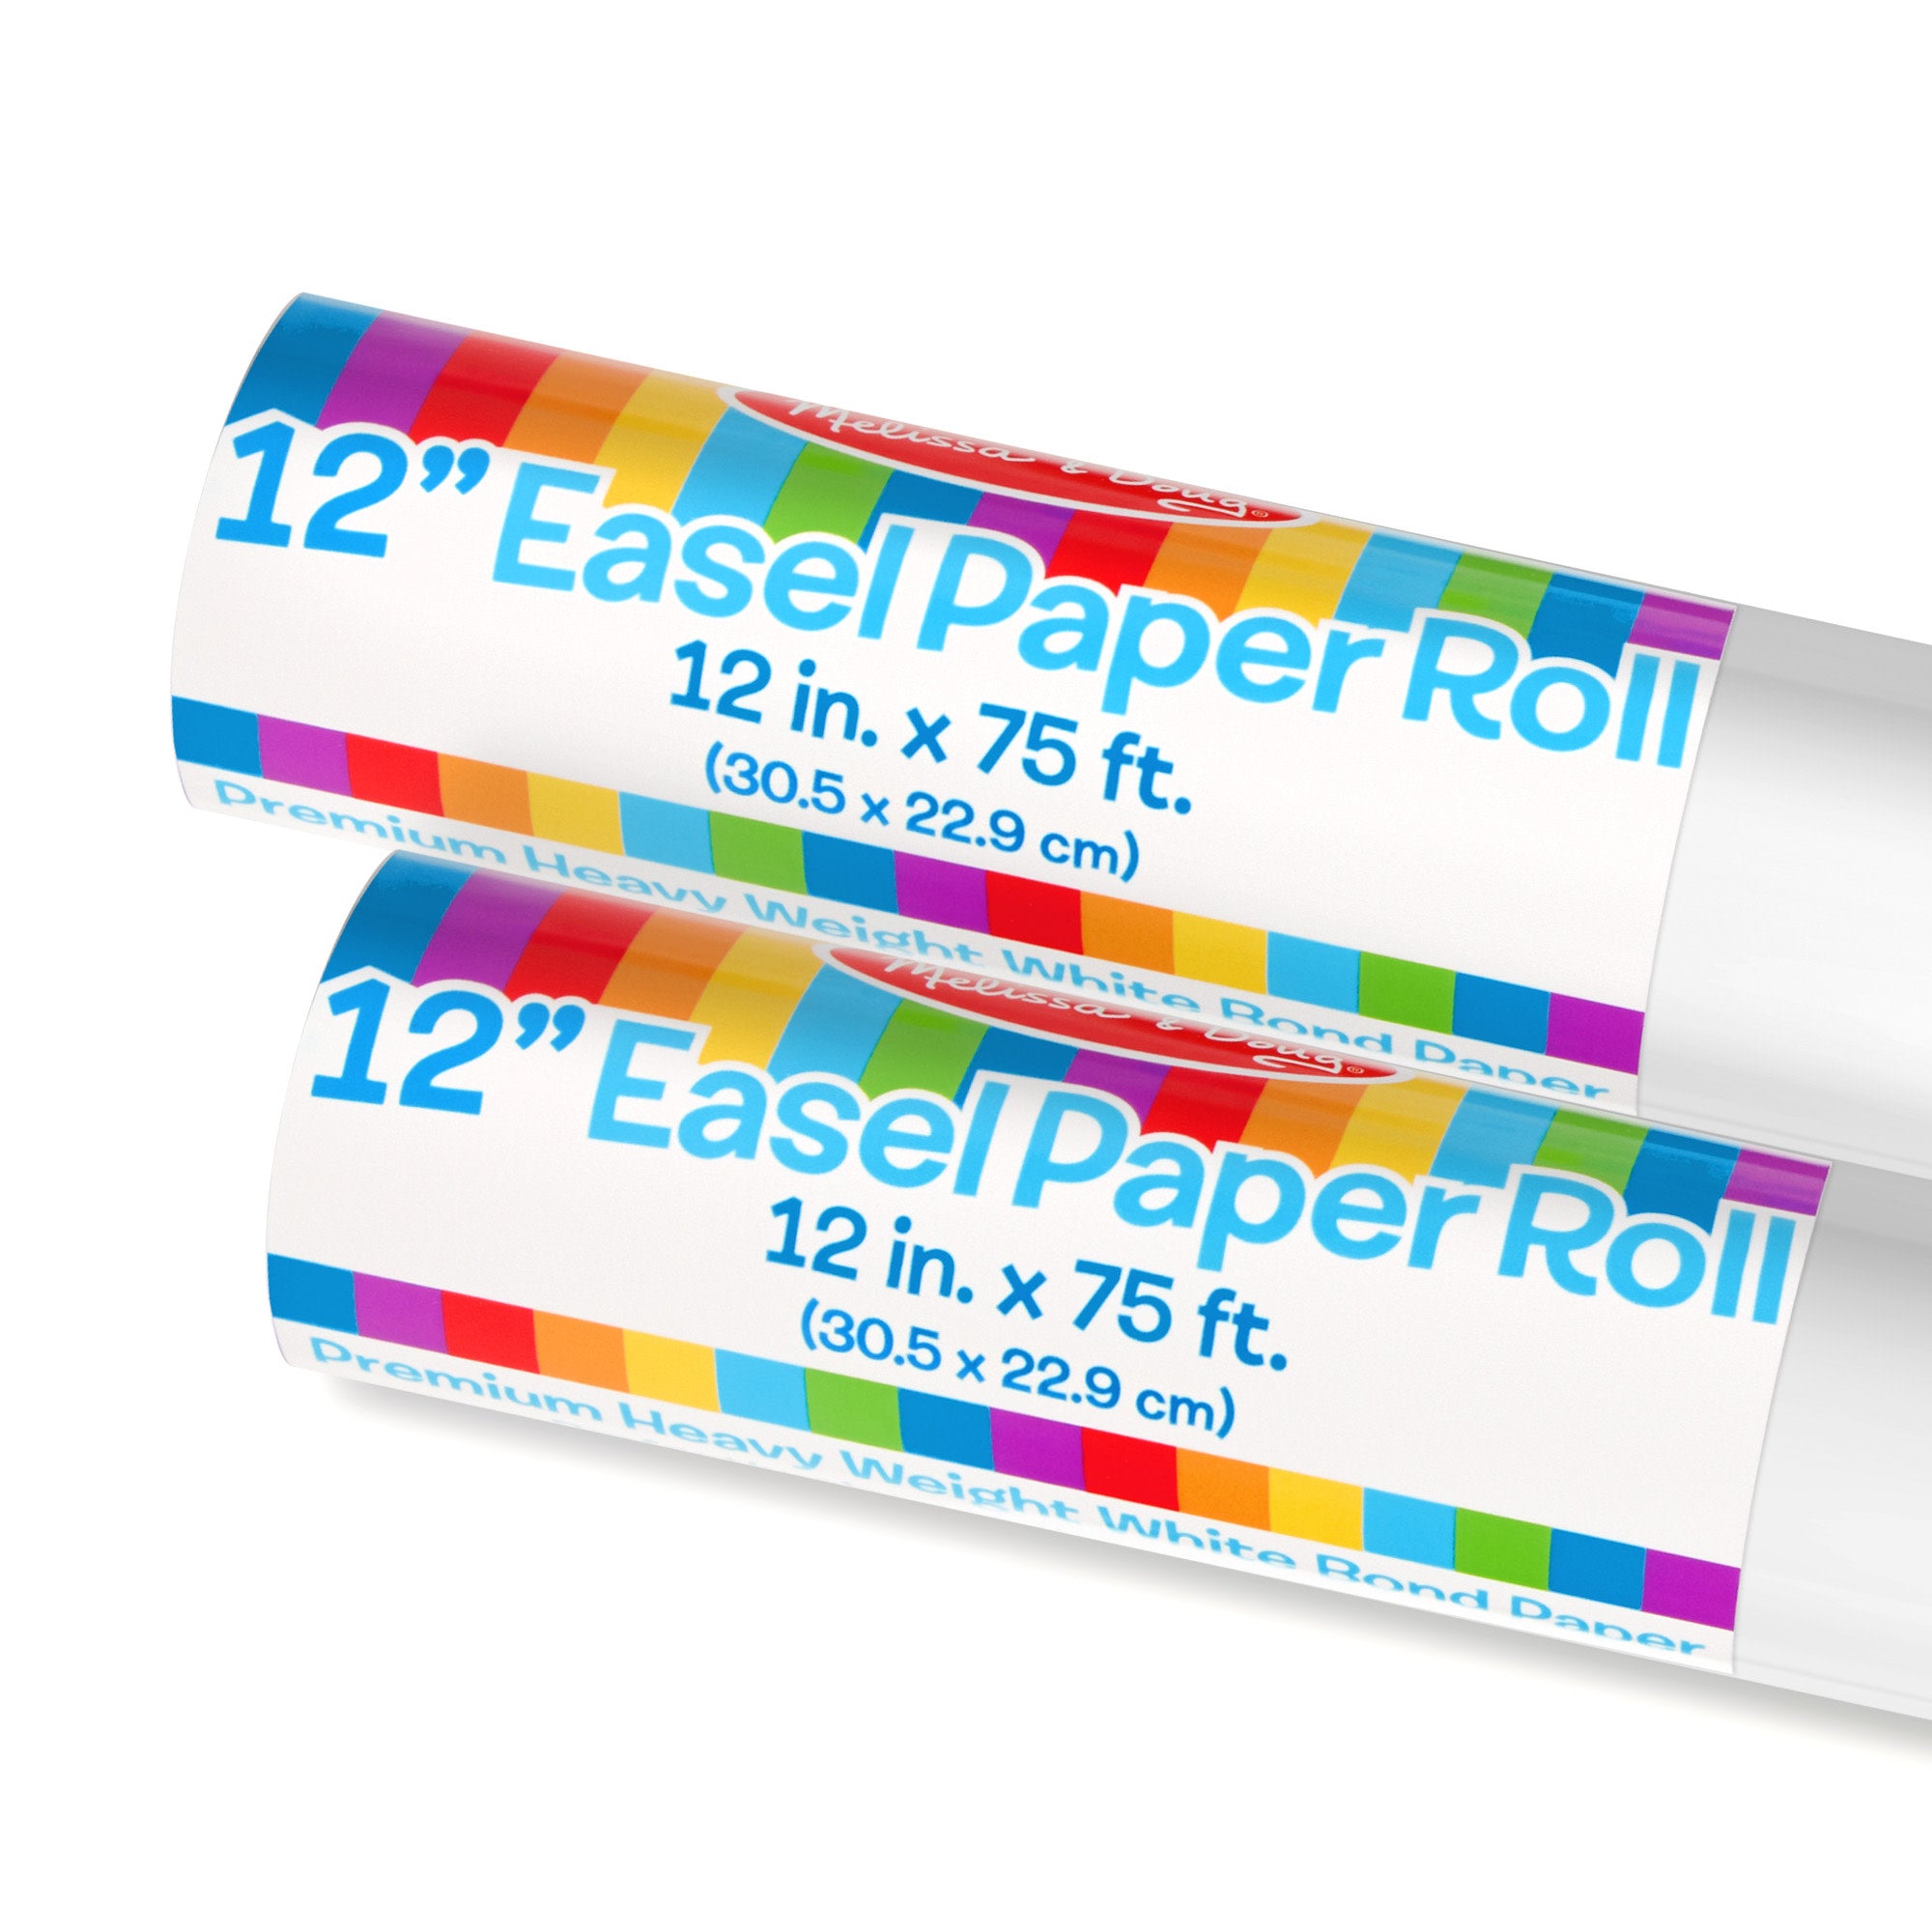 12 Easel Paper Roll Bundle (2 Pack)- Melissa and Doug